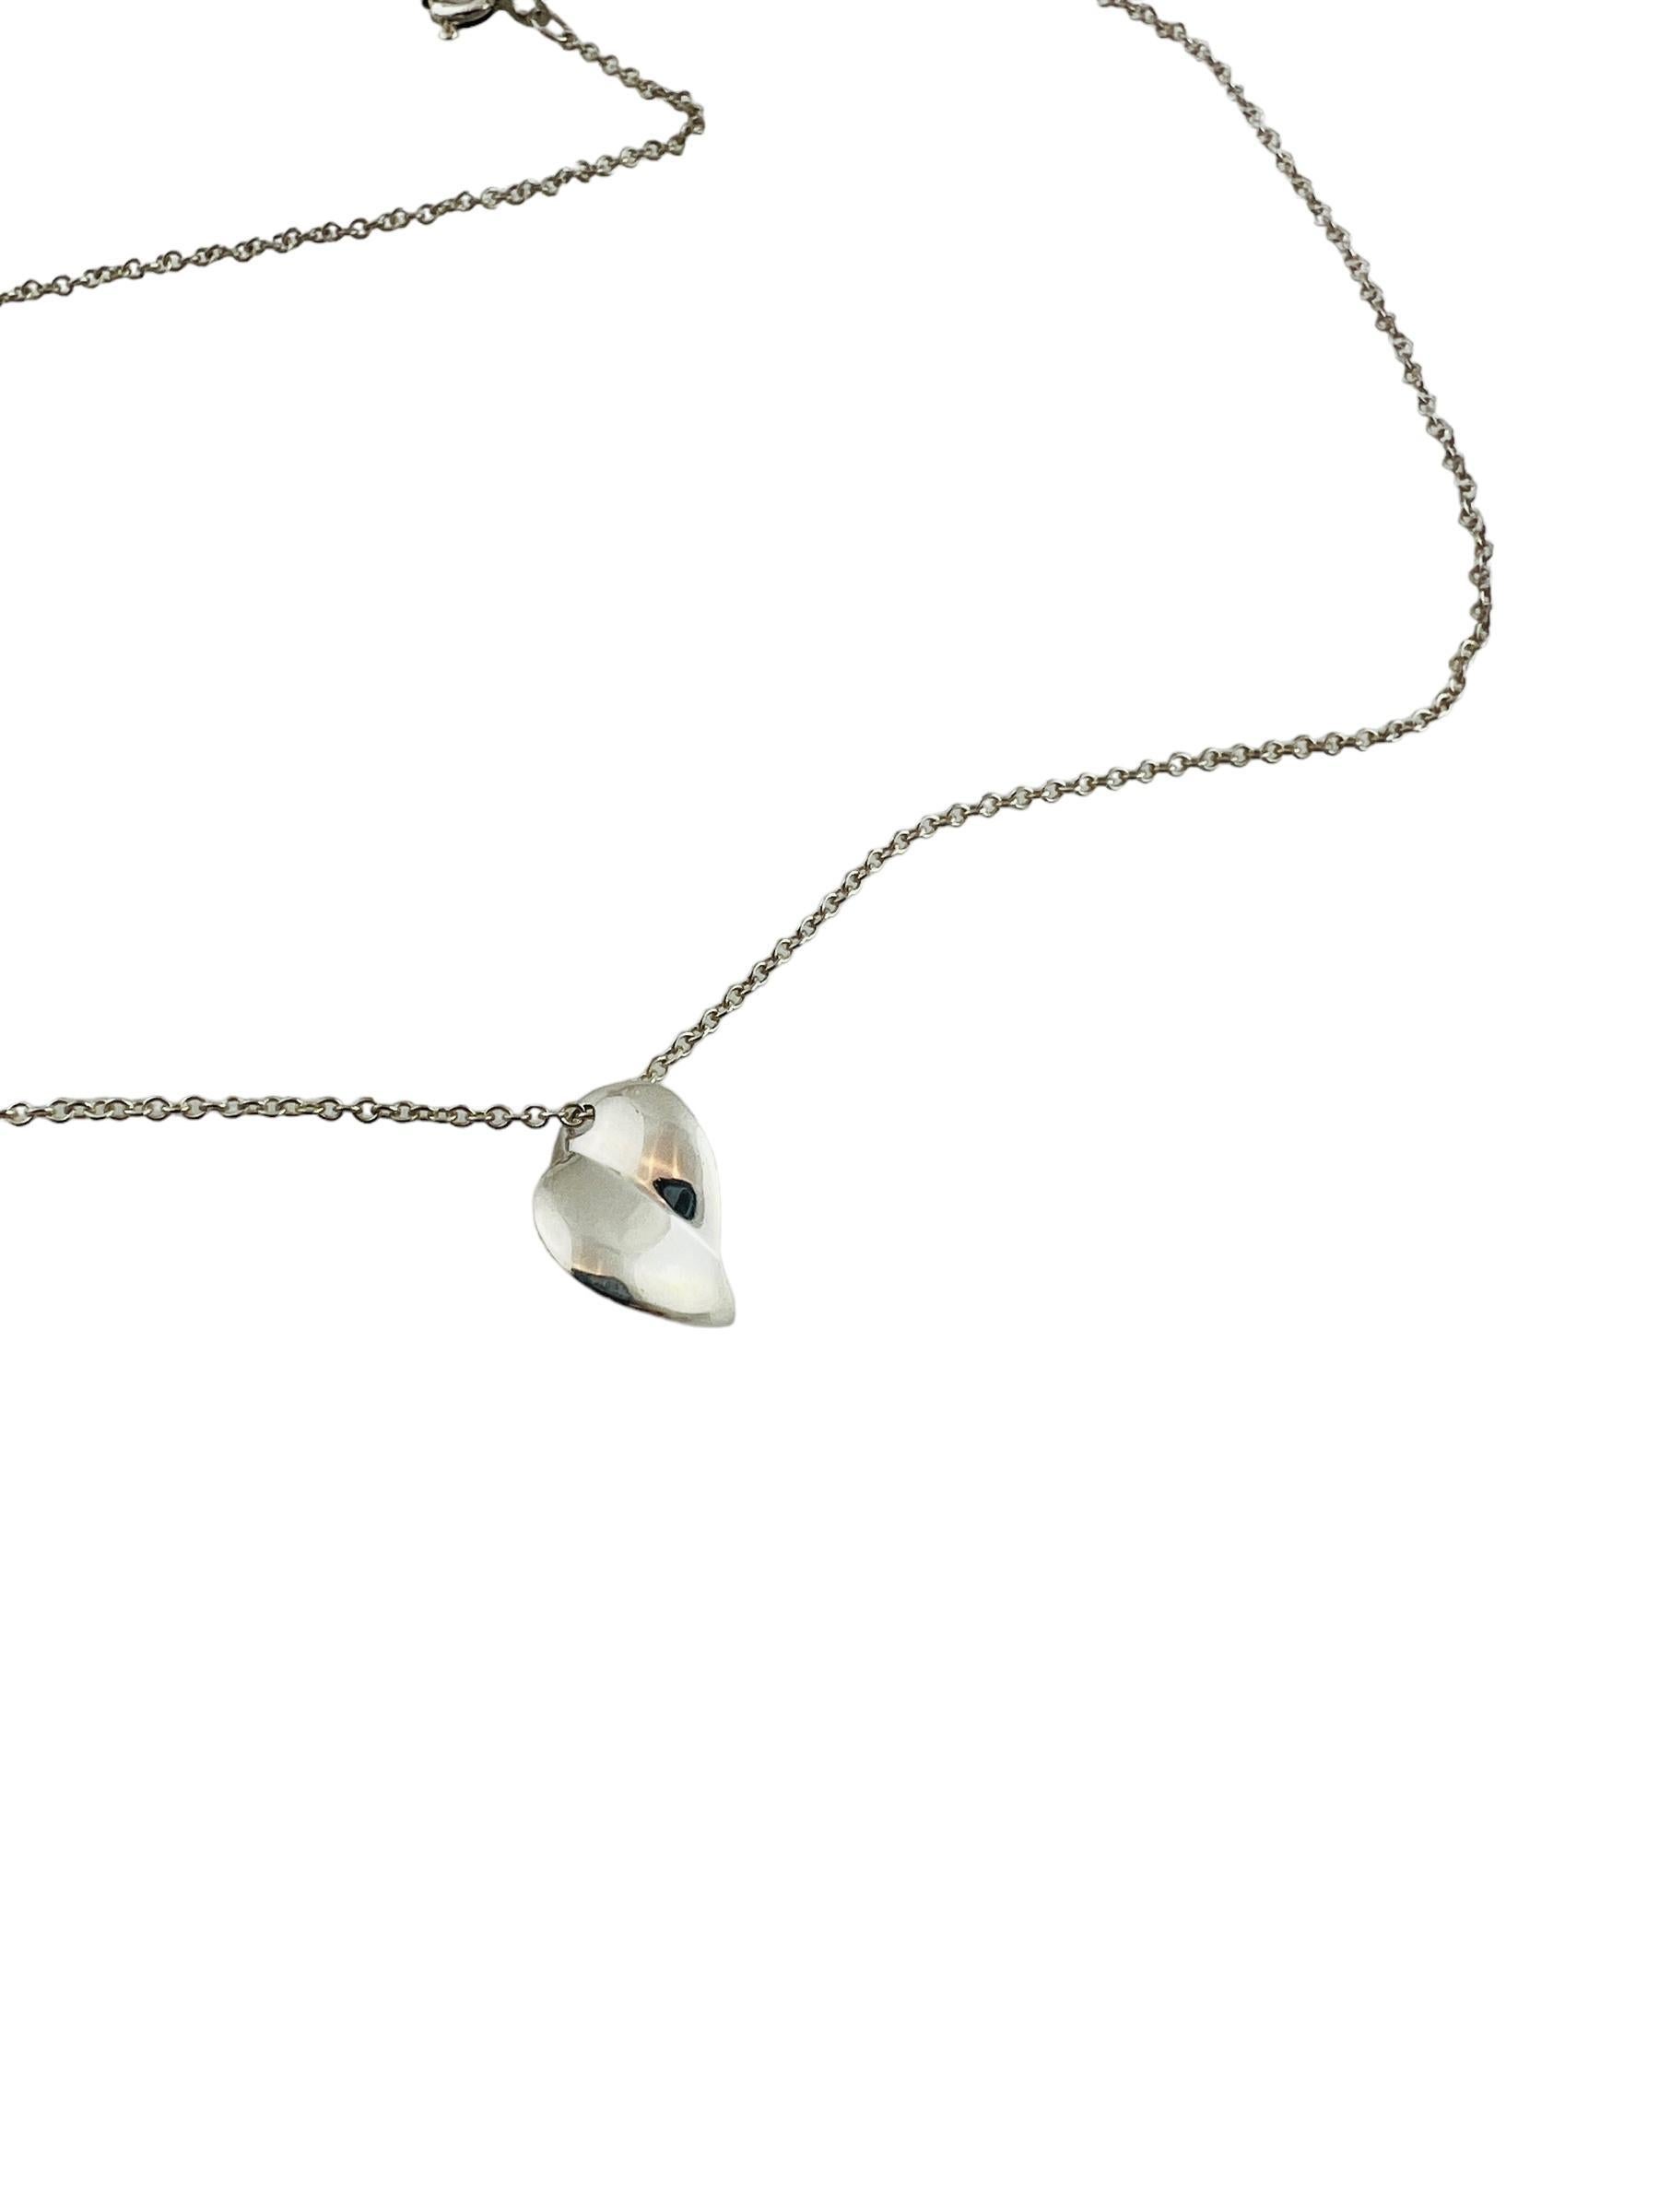 Tiffany & Co. Frank Gehry Sterling Silver Leaf Pendant Necklace 

This sterling silver heart leaf pendant necklace was designed by Frank Gehry for Tiffany & Co.

Tiffany chain is approx. 16.5